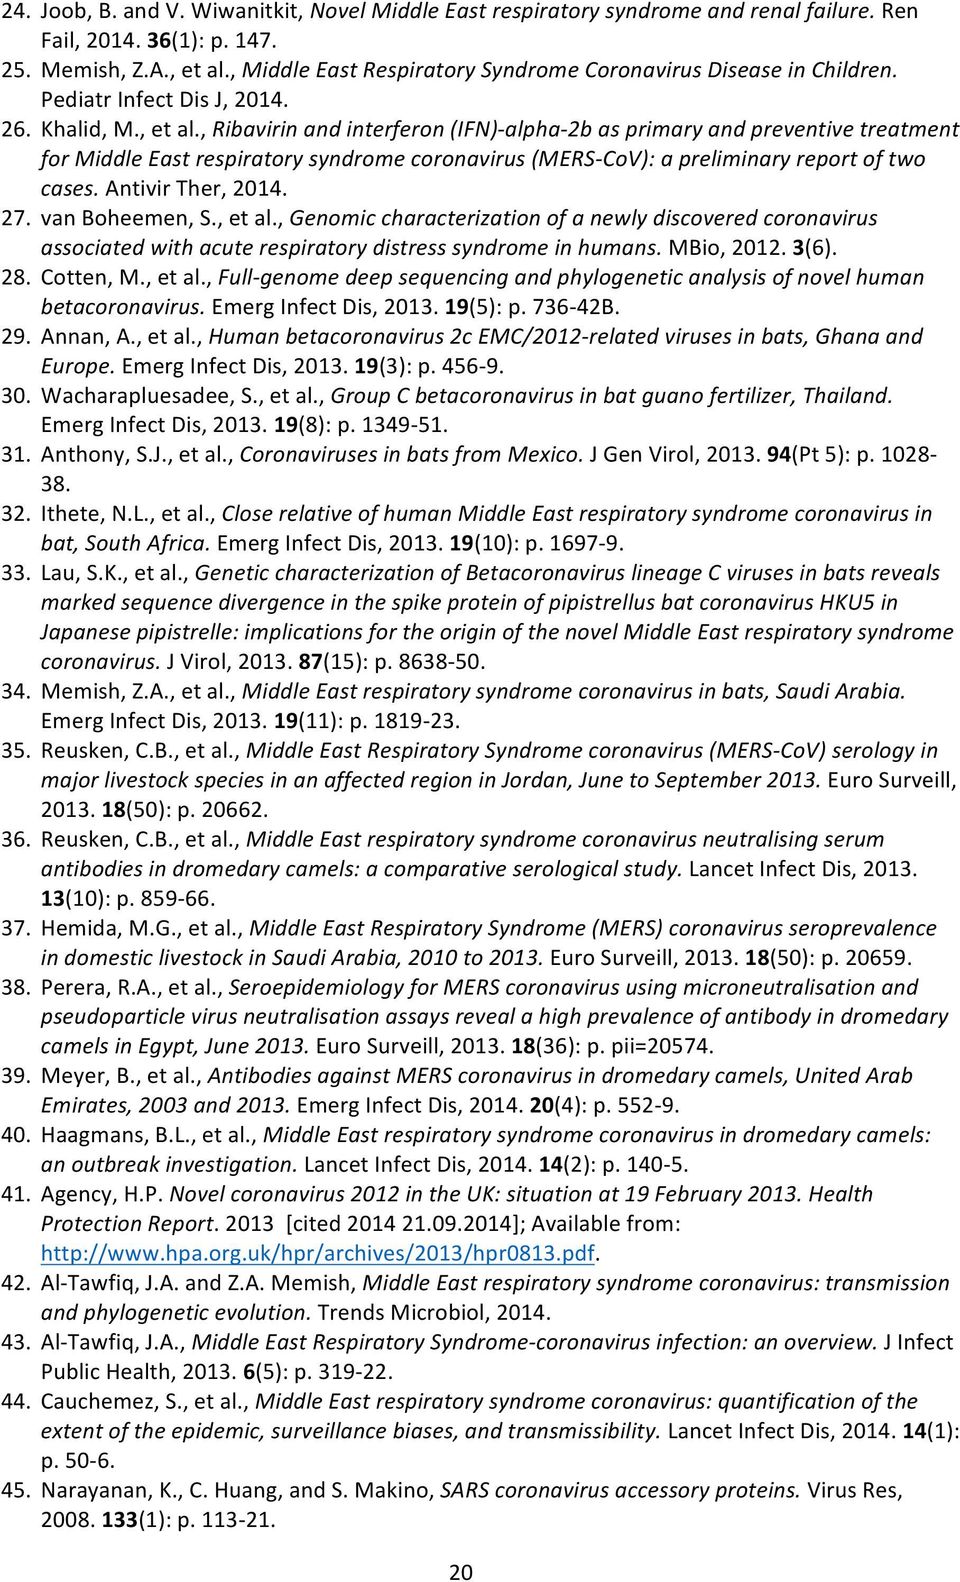 , Ribavirin and interferon (IFN)-alpha-2b as primary and preventive treatment for Middle East respiratory syndrome coronavirus (MERS-CoV): a preliminary report of two cases. Antivir Ther, 2014. 27.